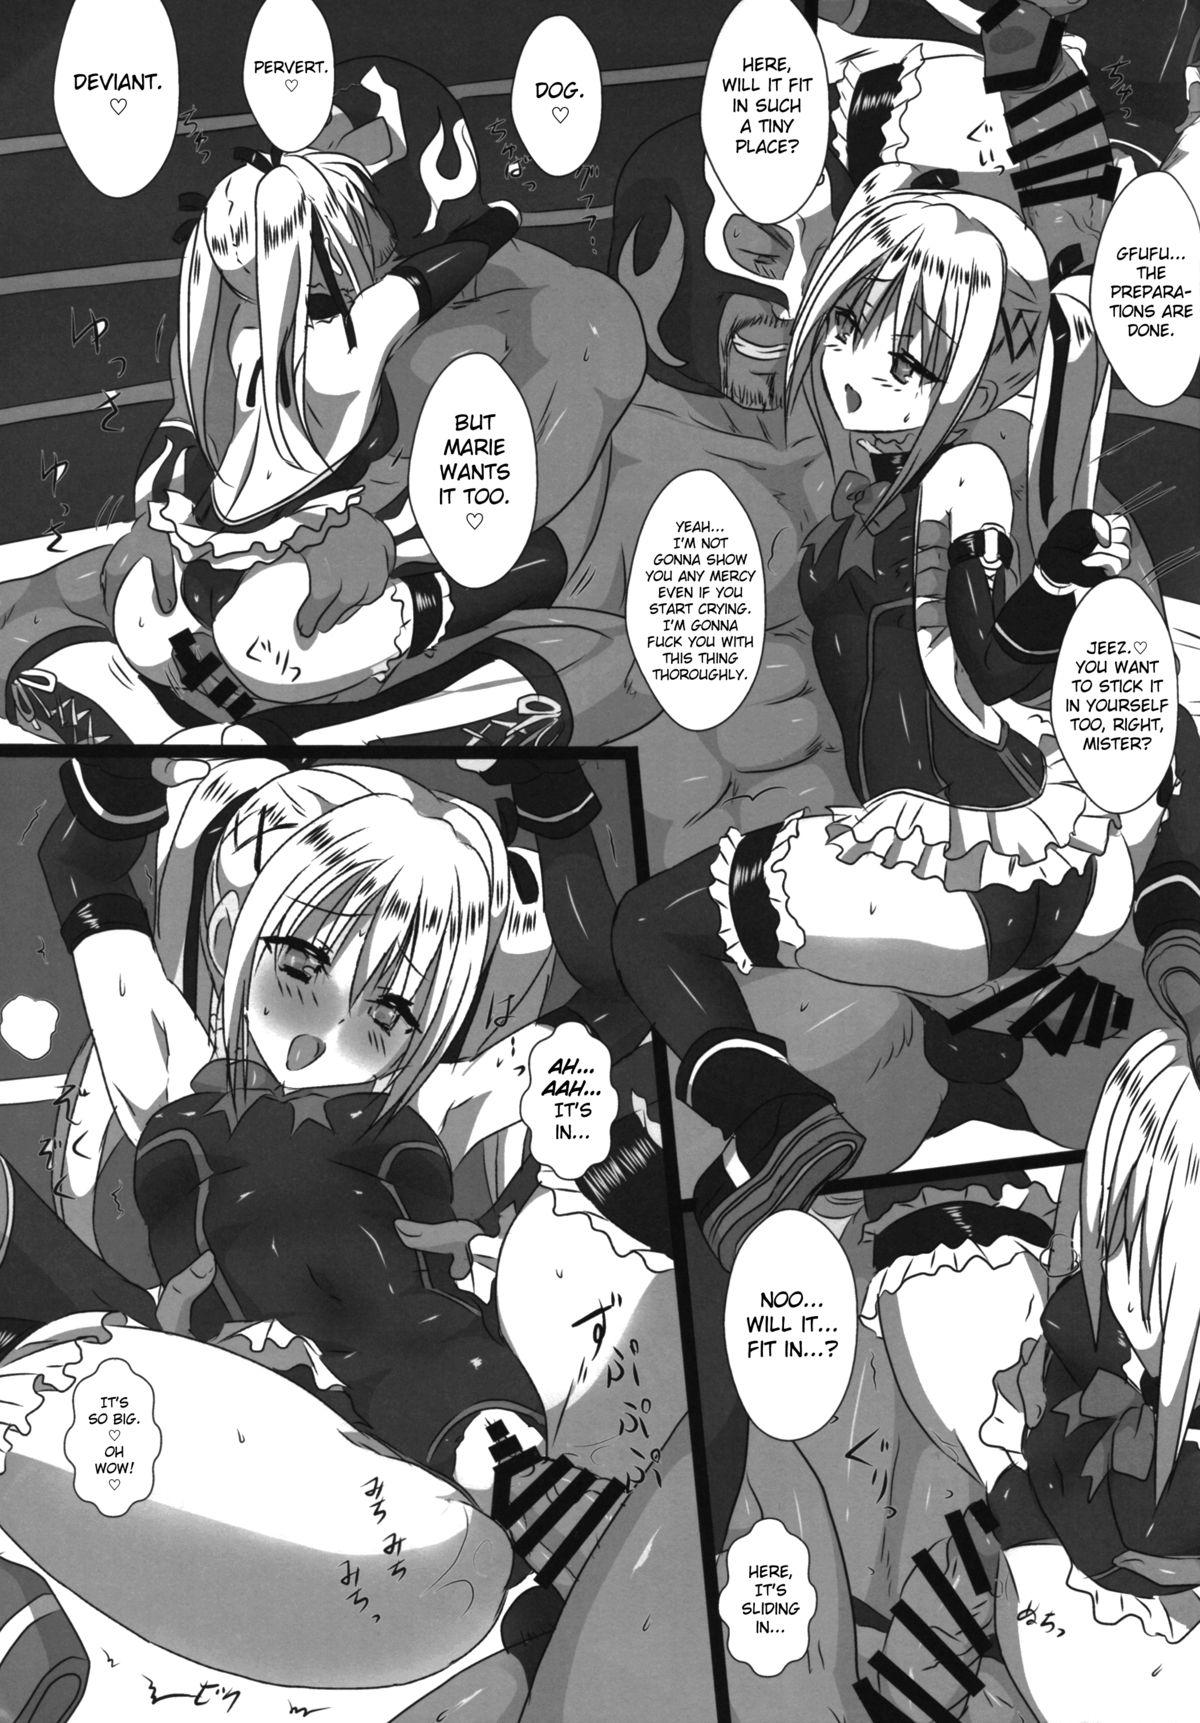 Doctor Koko de Shitai no ne...? | This is where you want to do it, right...? - Dead or alive Real Amature Porn - Page 10